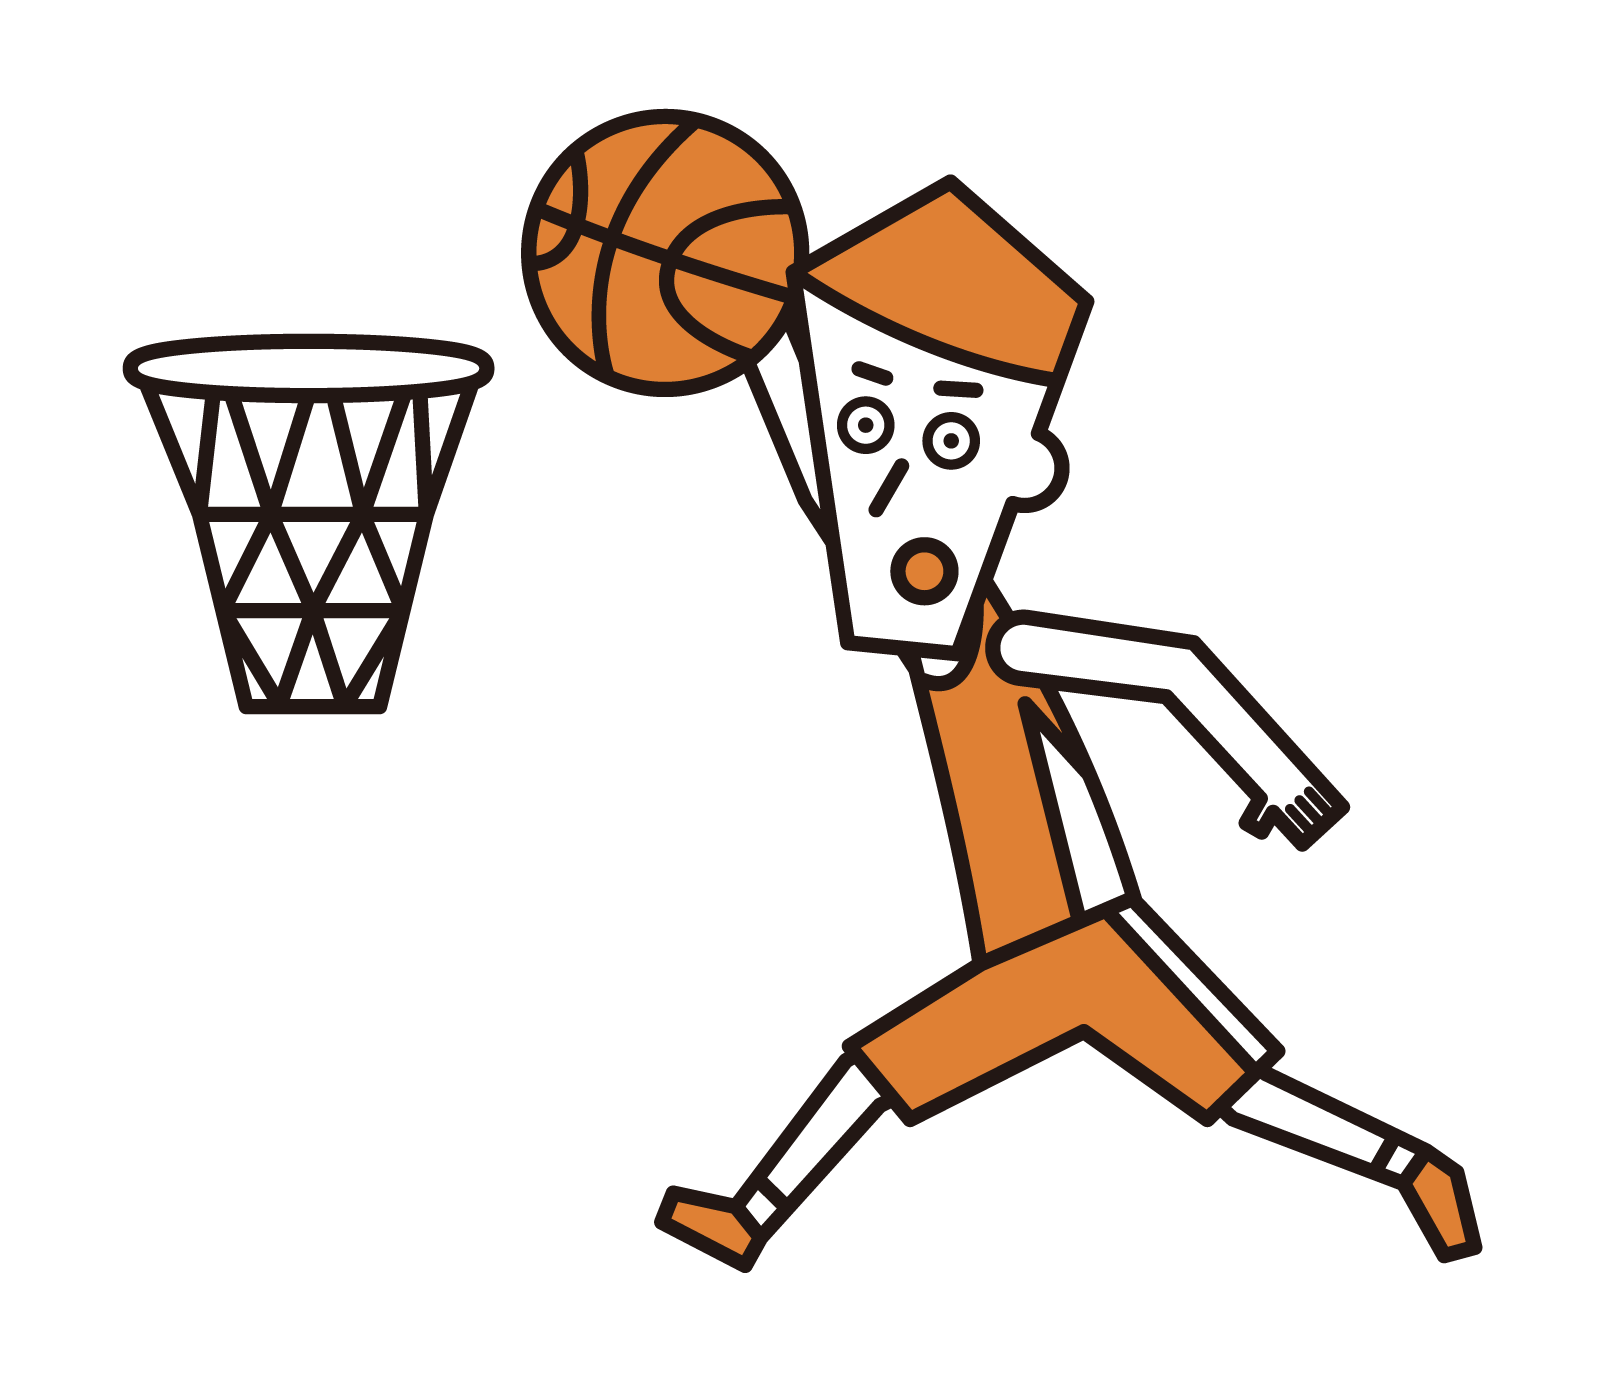 Illustration of a basketball player (male) dunking